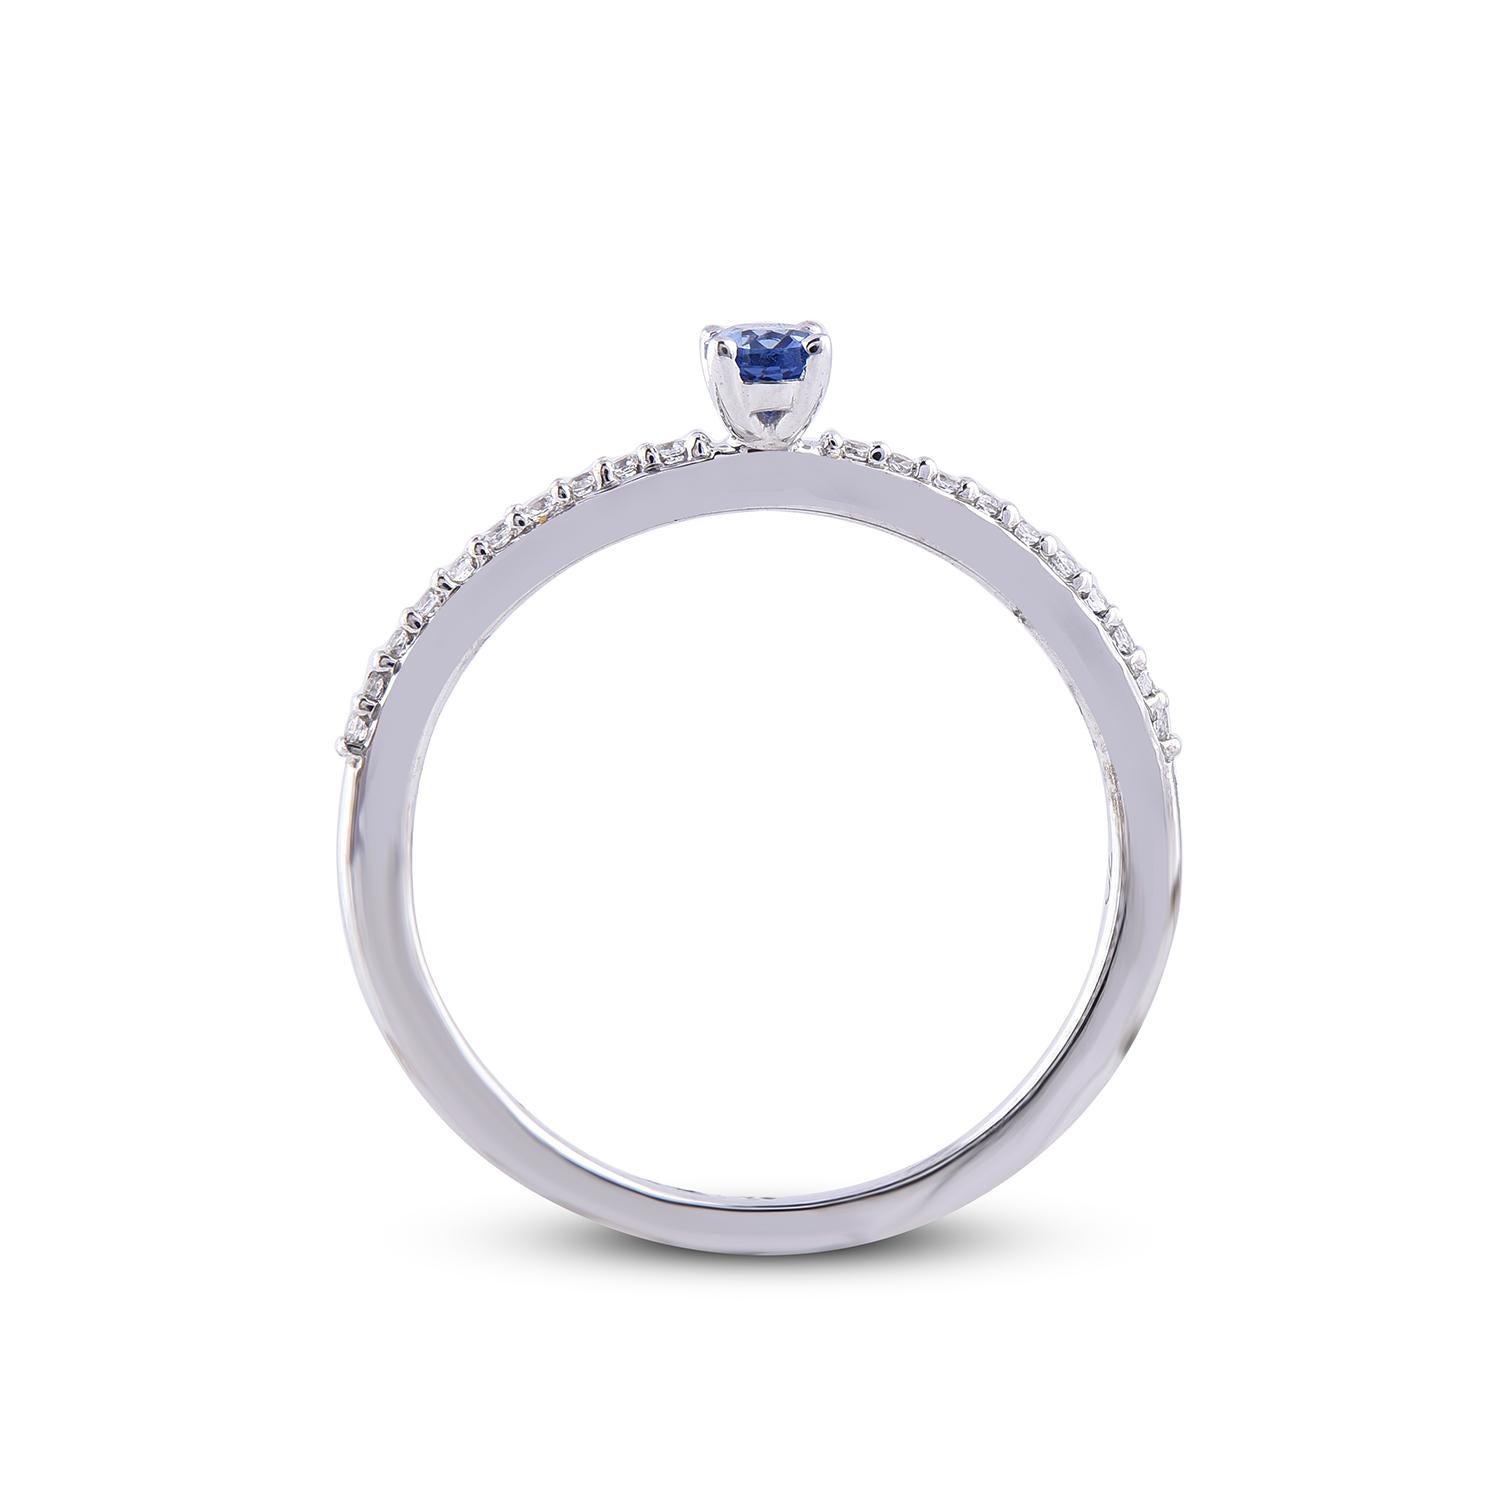 TJD 0.10 Carat 14 Karat White Gold Round and Oval Cut Tanzanite Engagement Ring For Sale 1